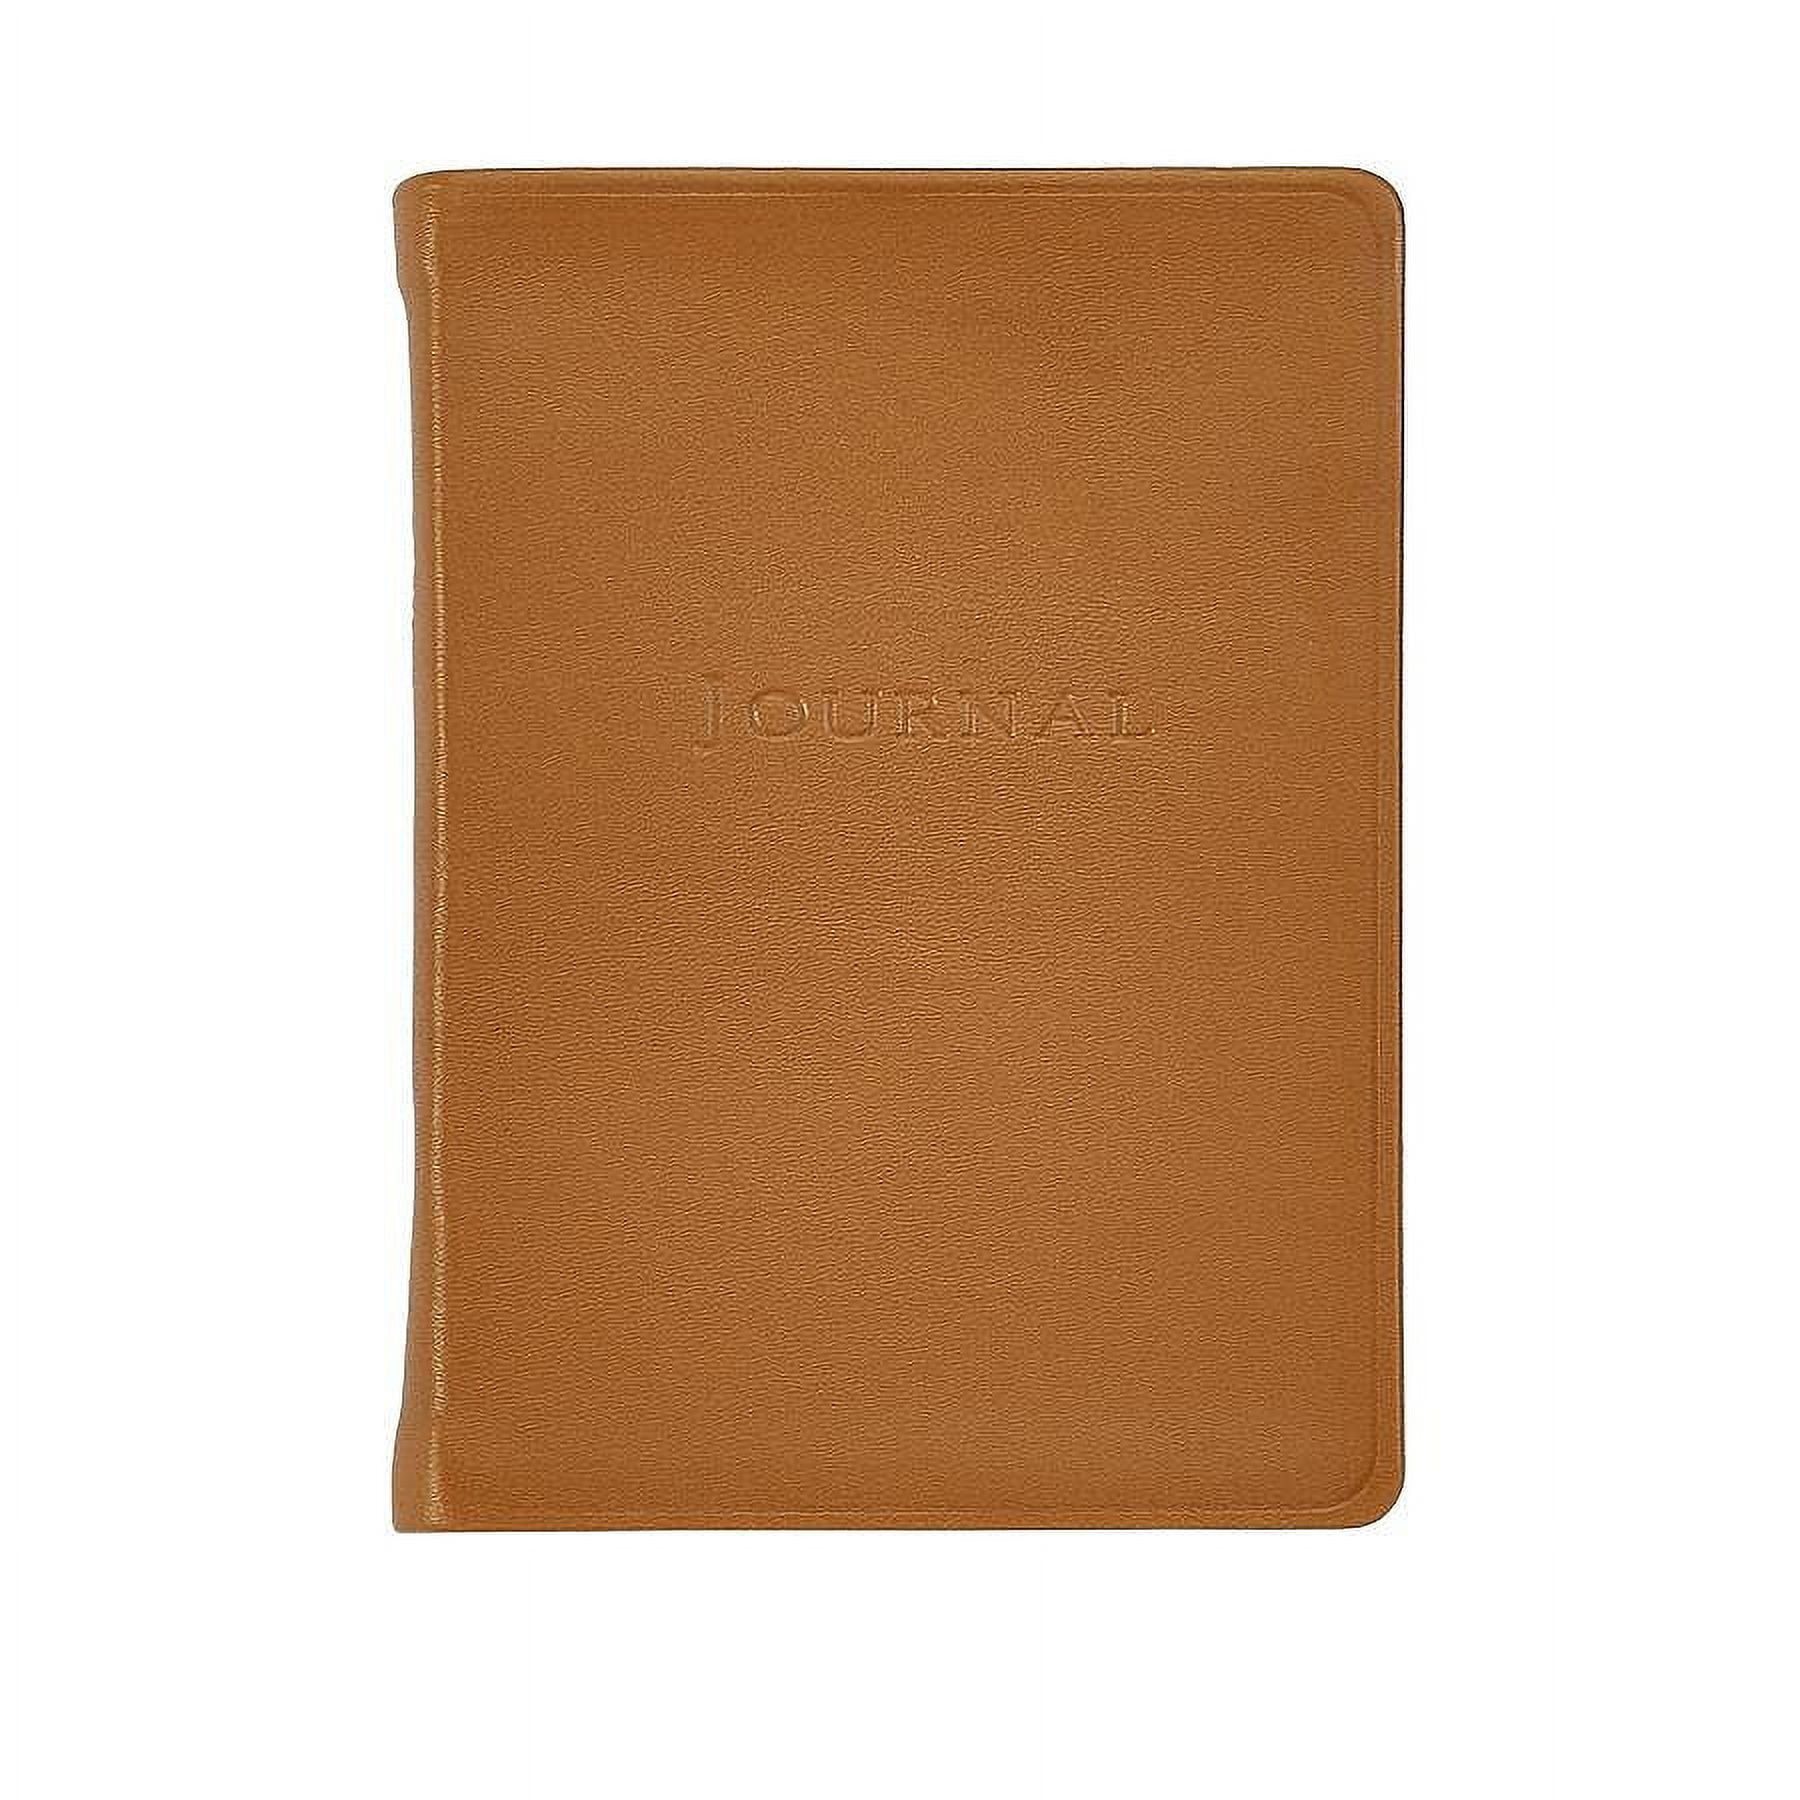 World Travel Journal Pocket 6in British-Tan Fine Leather by Graphic Image Trade